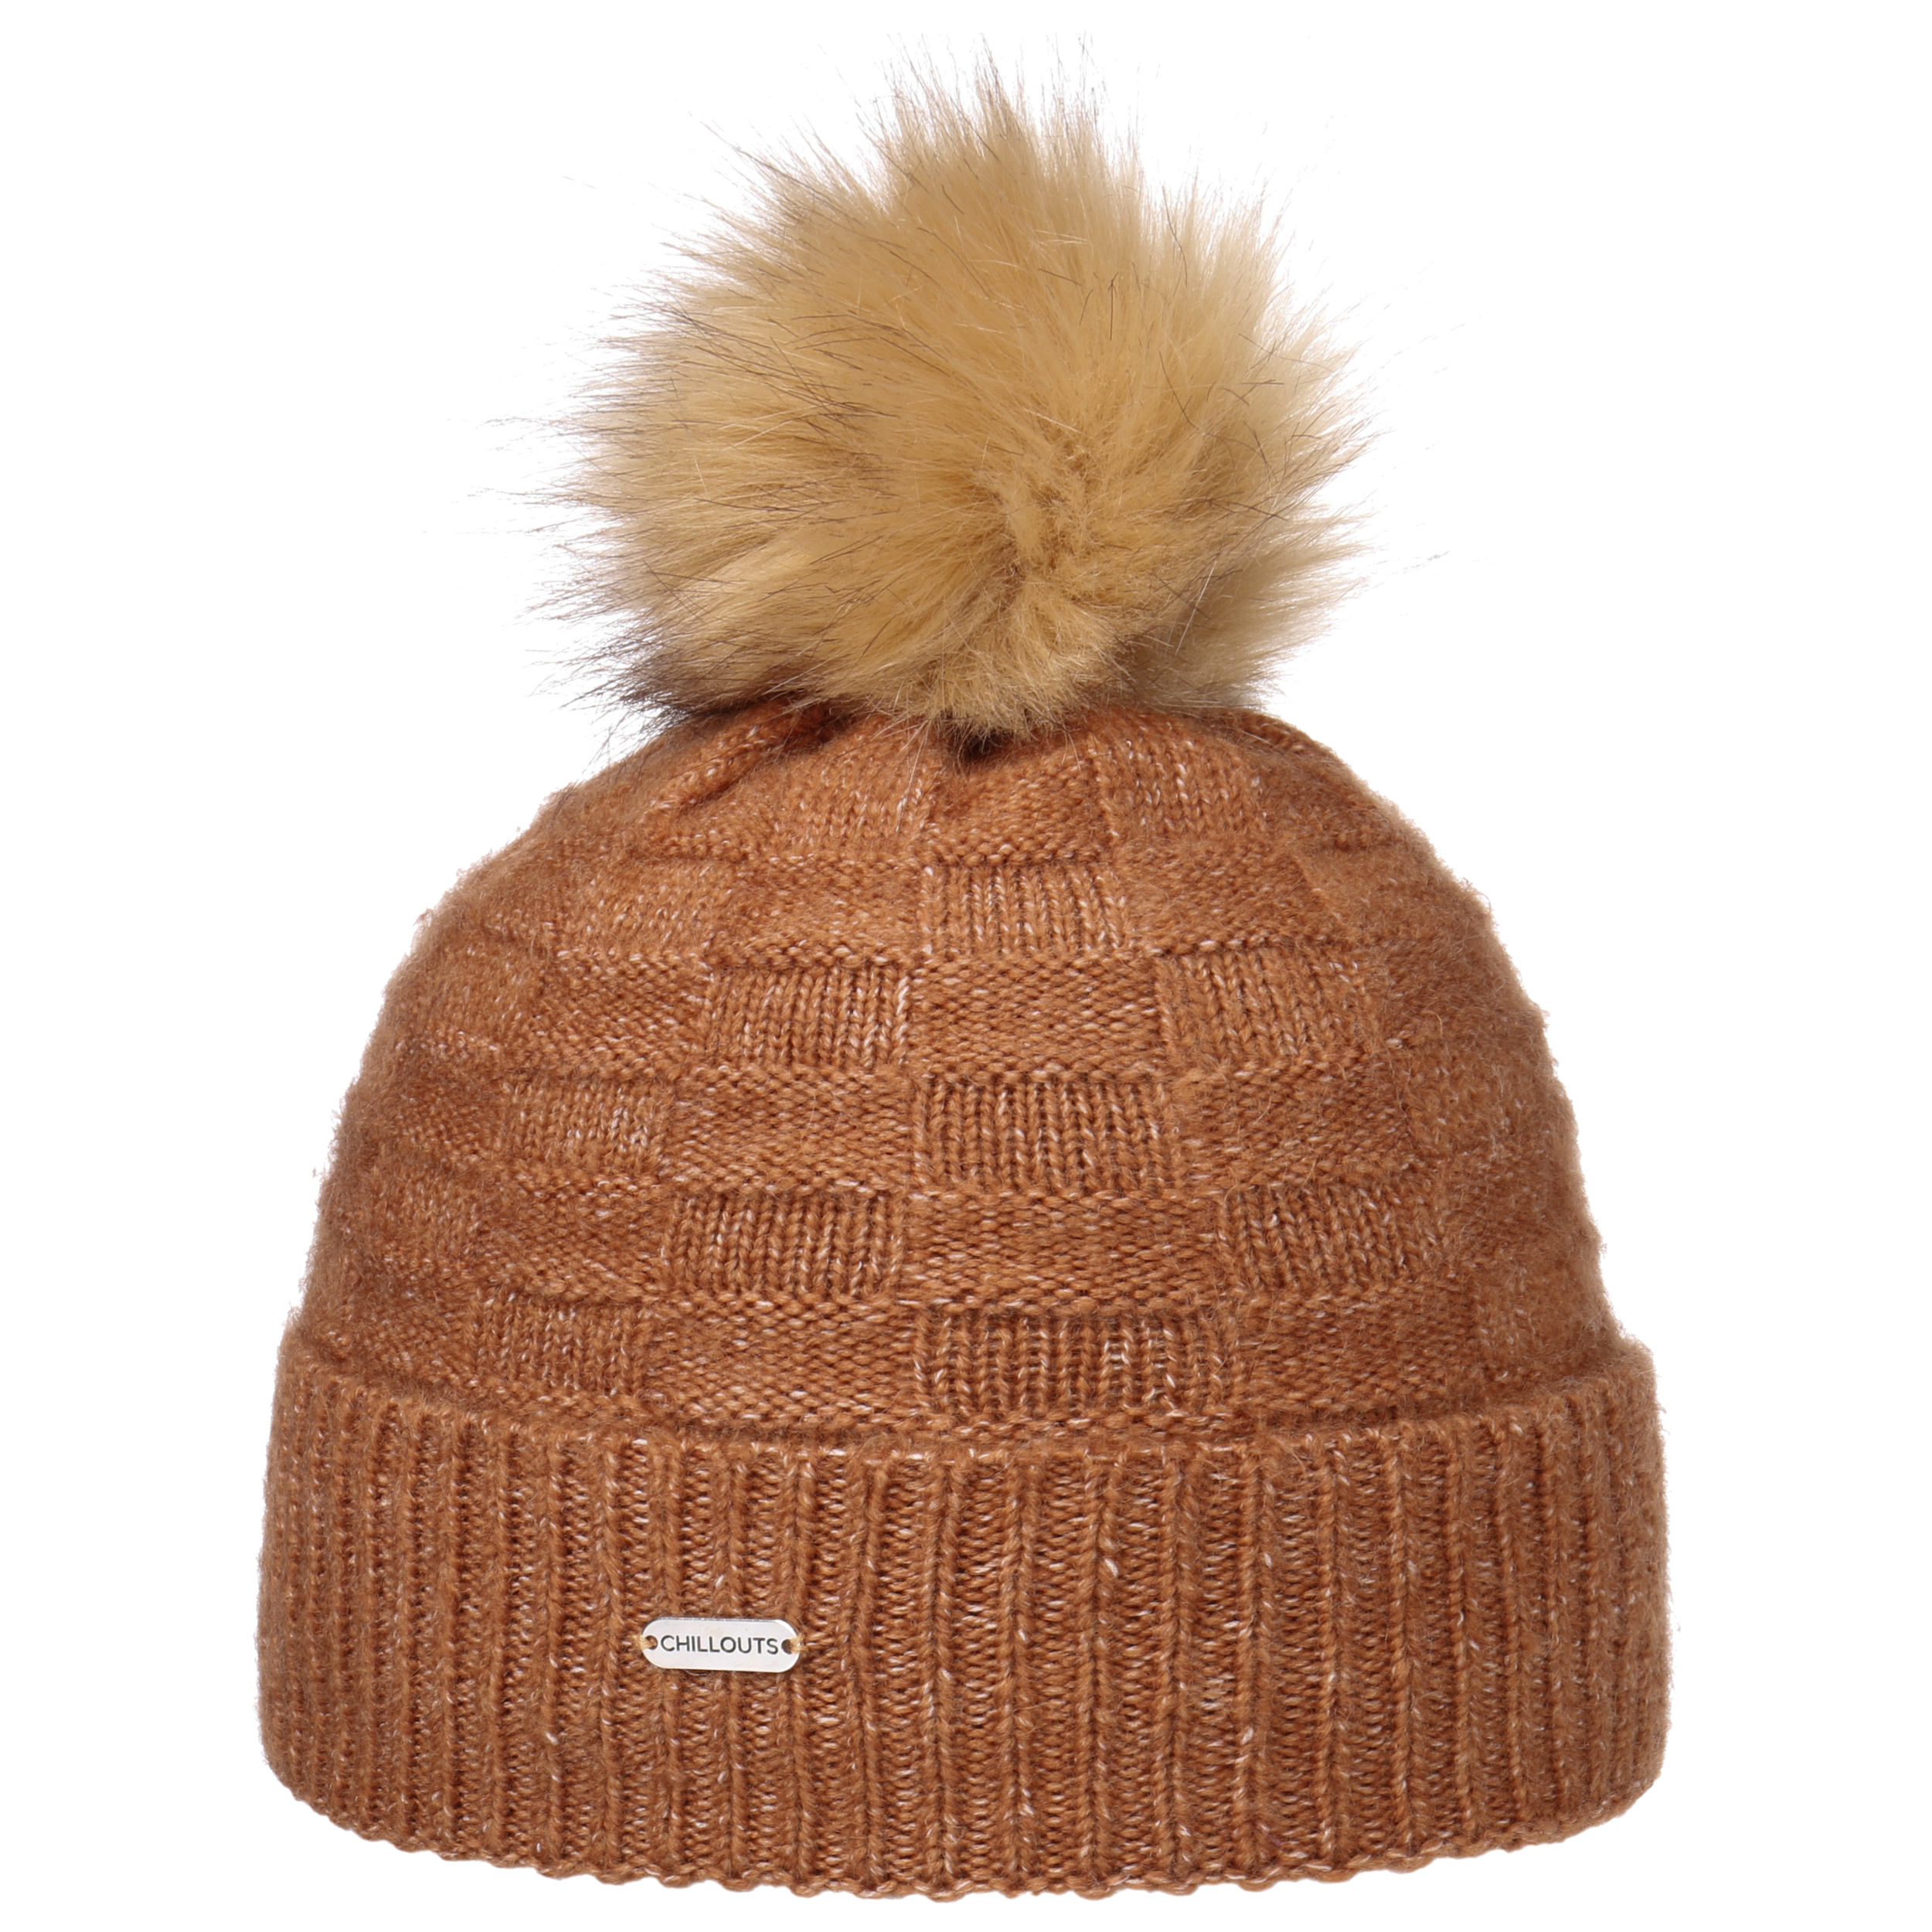 brandstof Inspectie Worstelen Giovanna Recycled Beanie Muts by Chillouts - 24,99 €